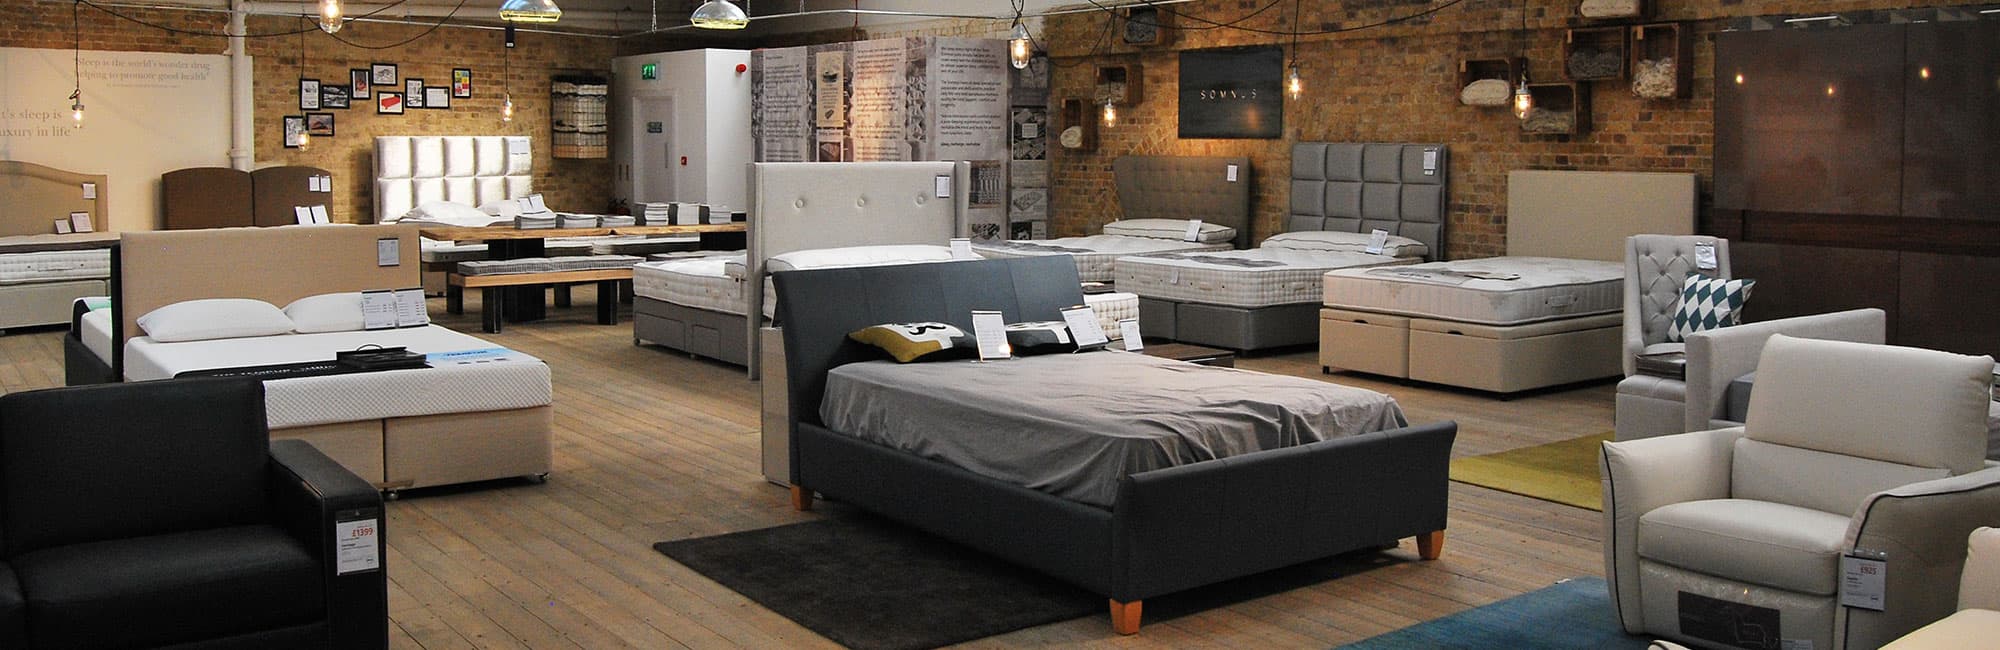 Bed store